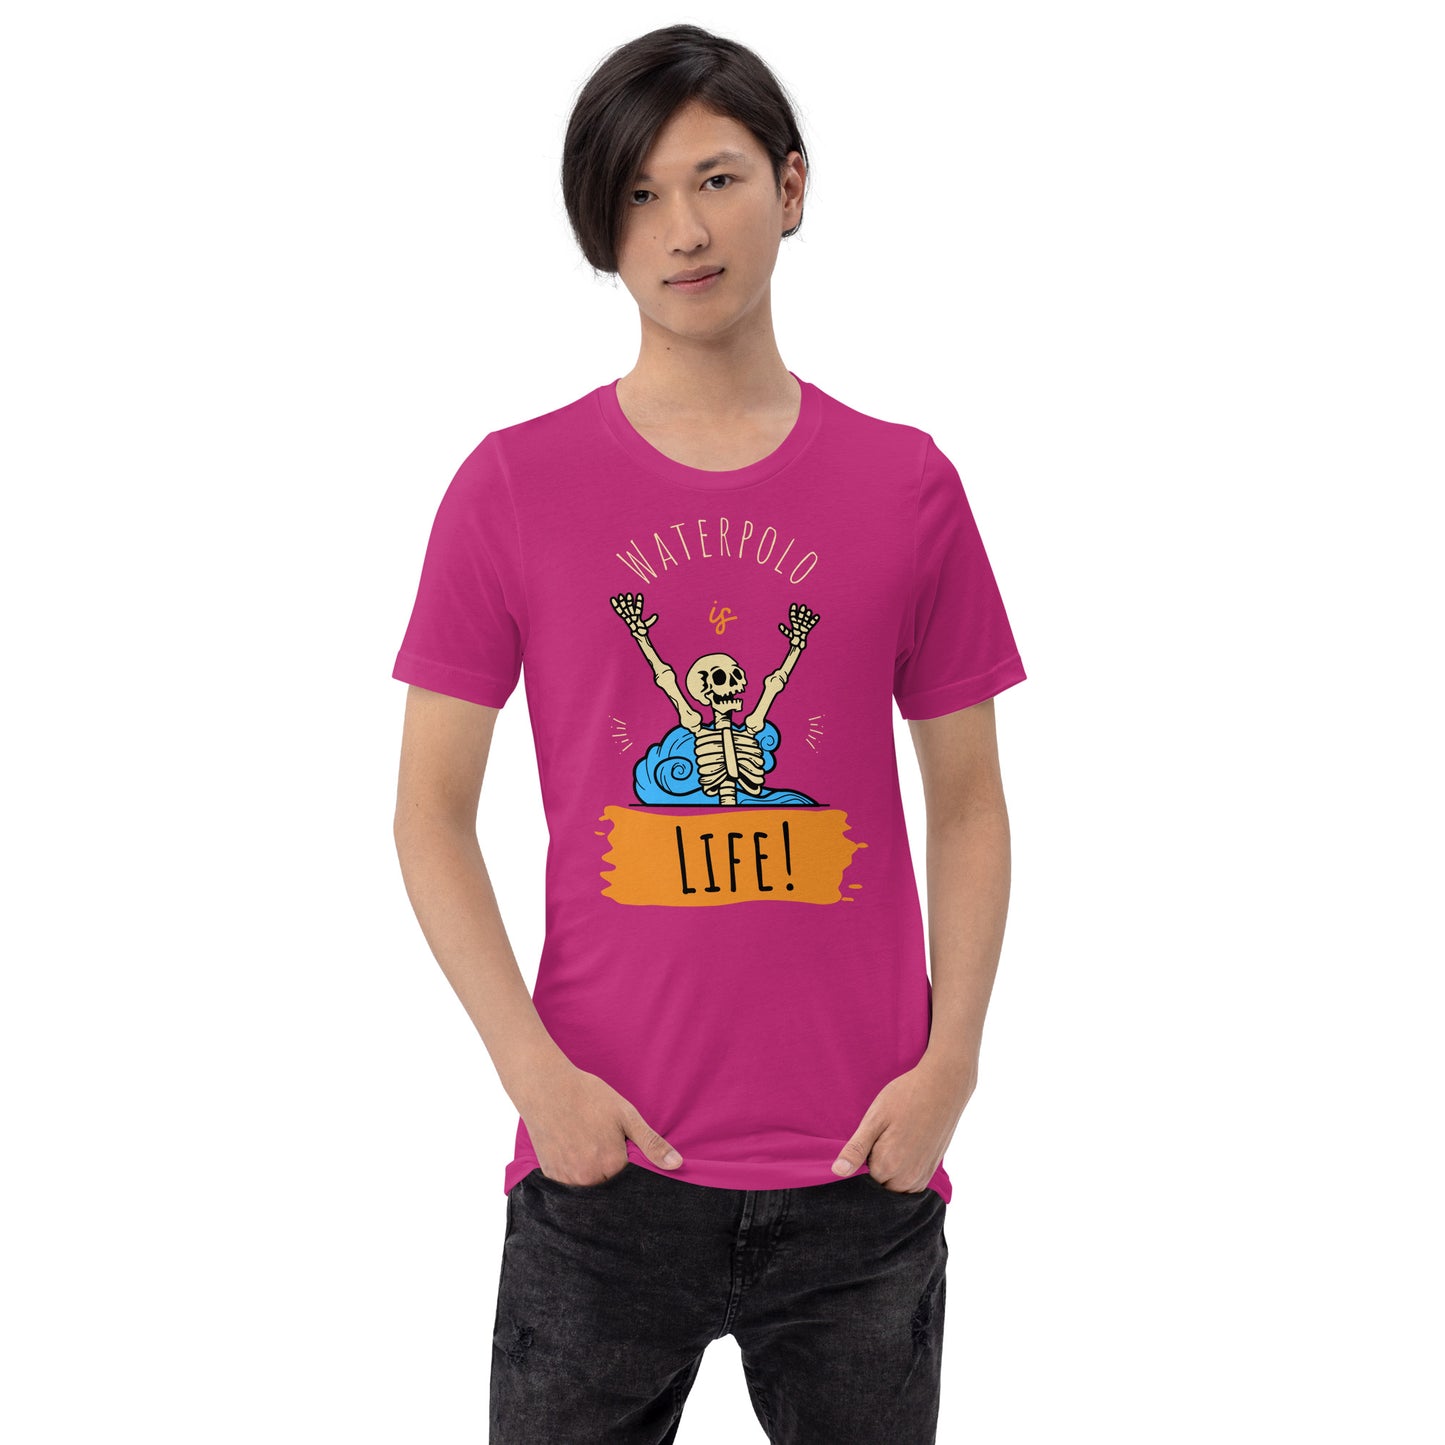 Water Polo is Life Skeleton - Unisex Soft T-shirt - Bella Canvas 3001